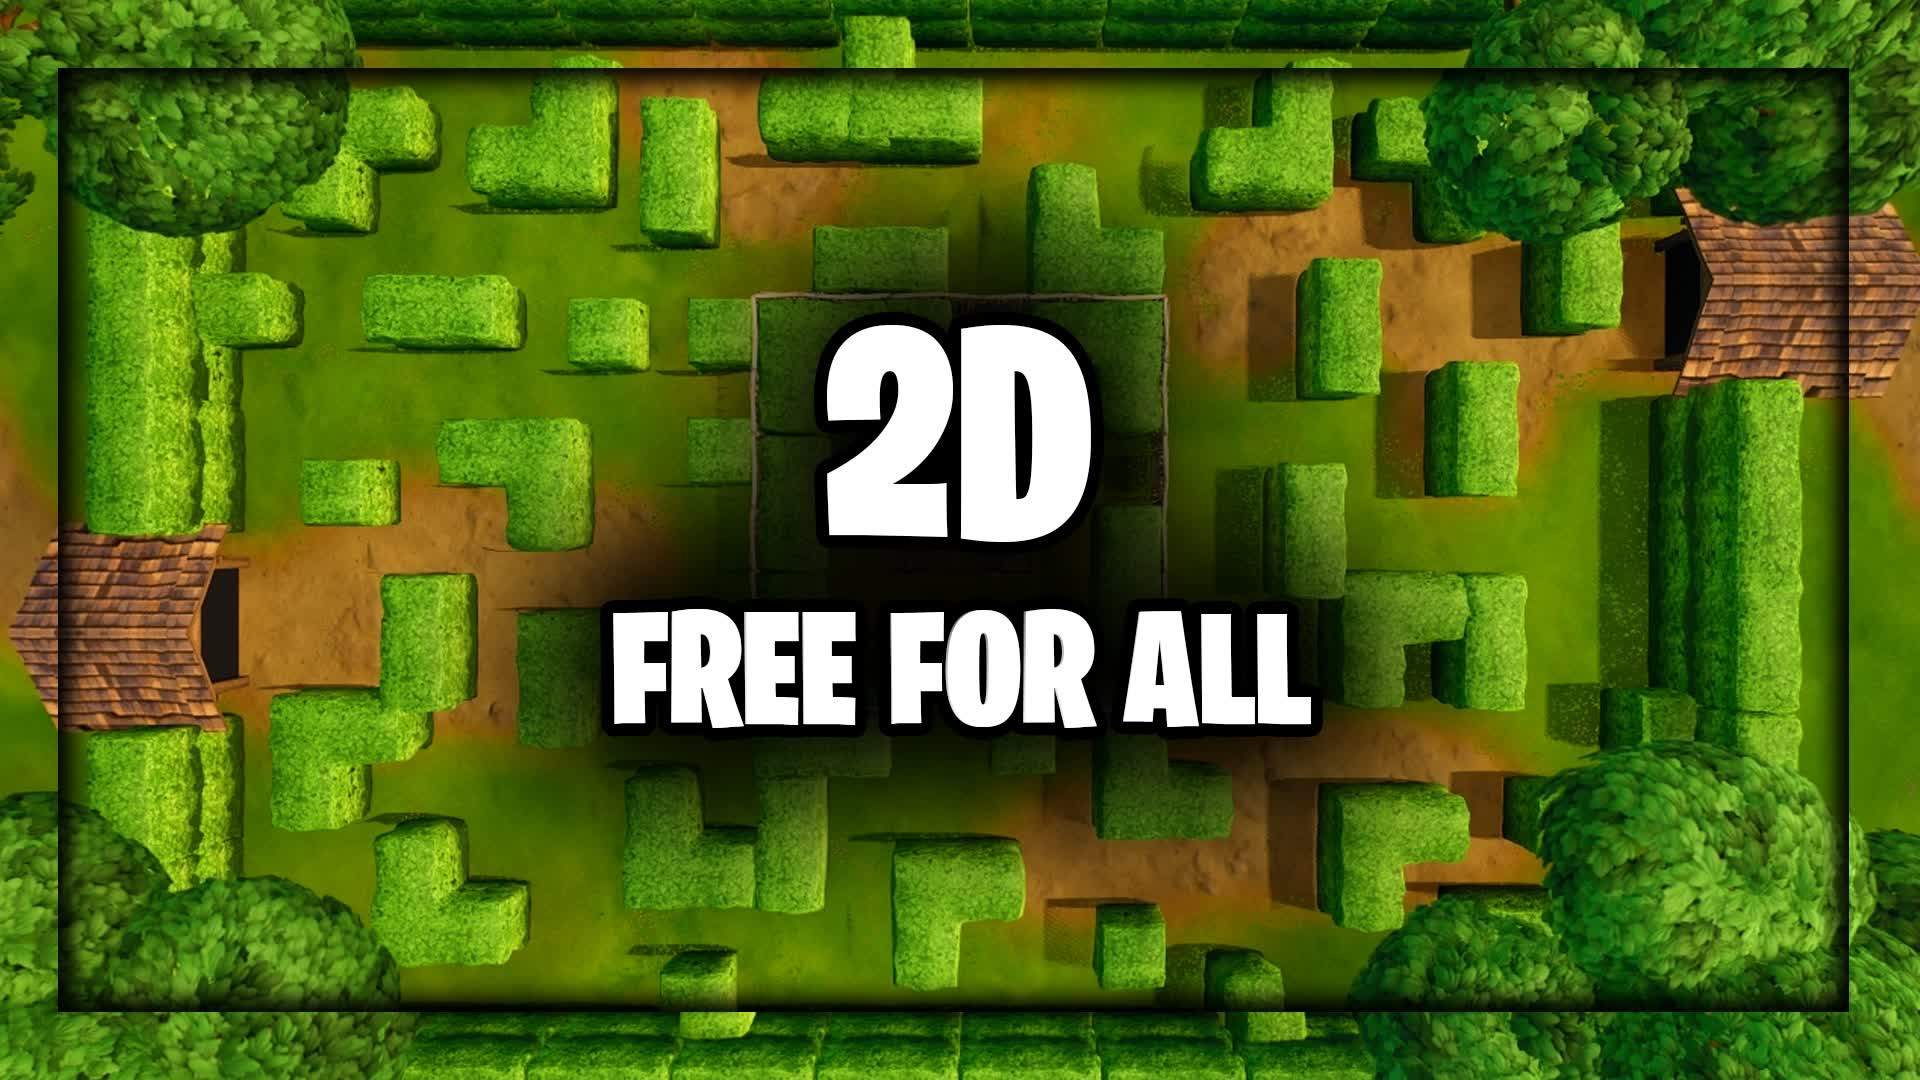 2D FREE FOR ALL | WAILING WOODS